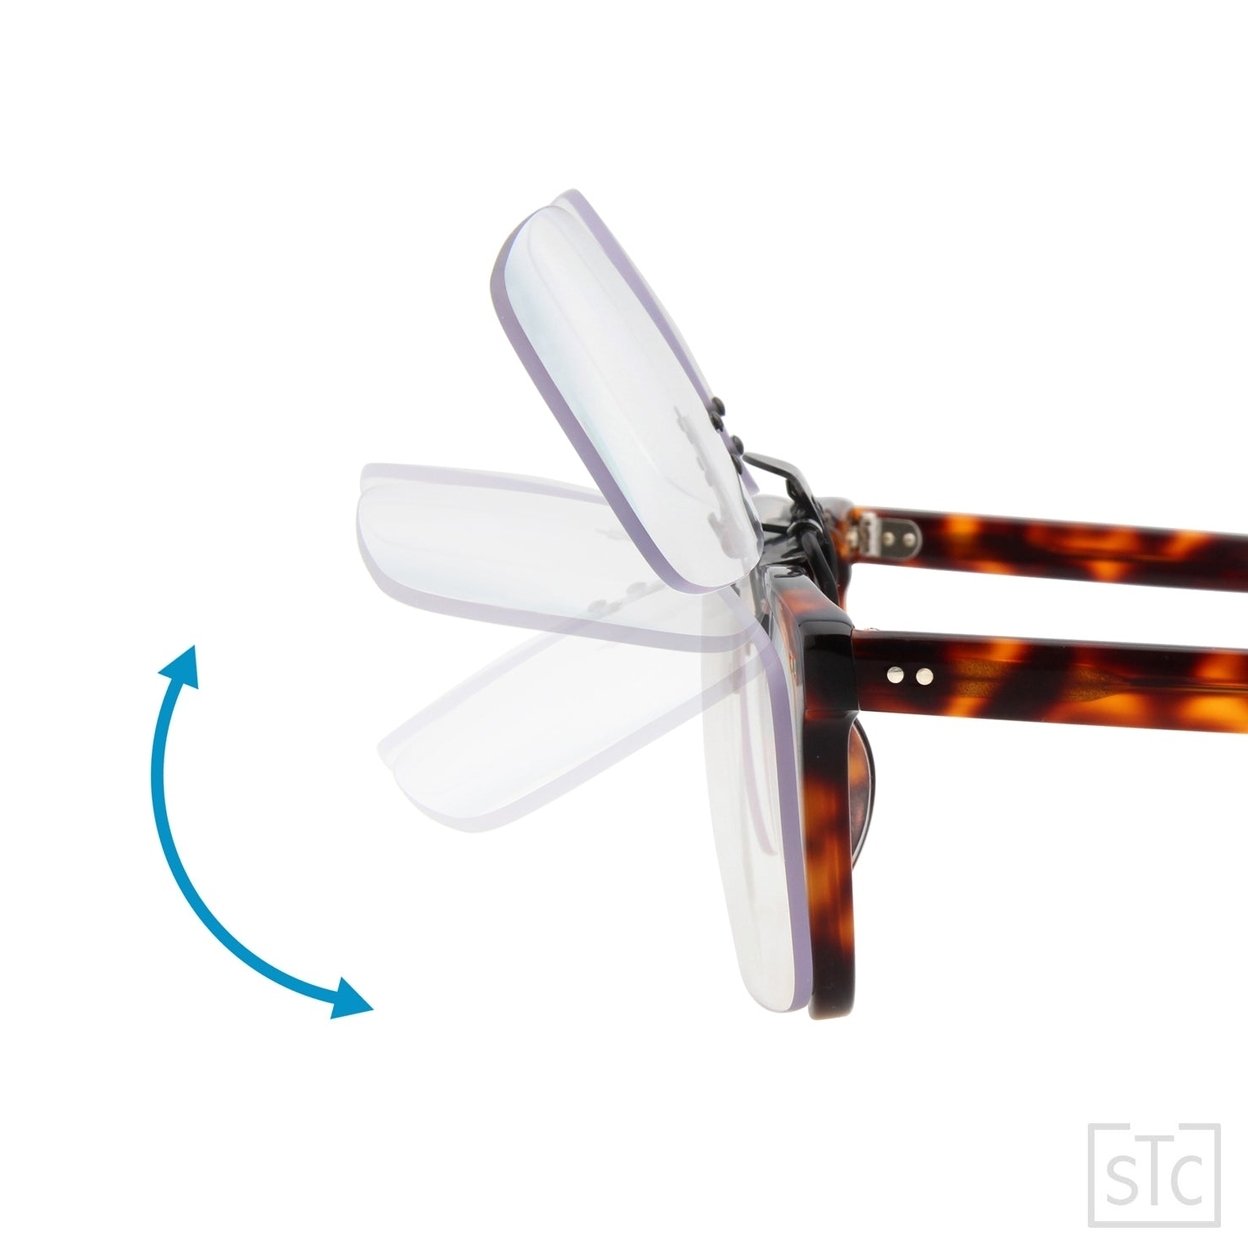 Clip-on Flip Up Rimless Magnifying, Suitable For Reading Glasses, Clip Onto Over Eyeglasses - +1.50